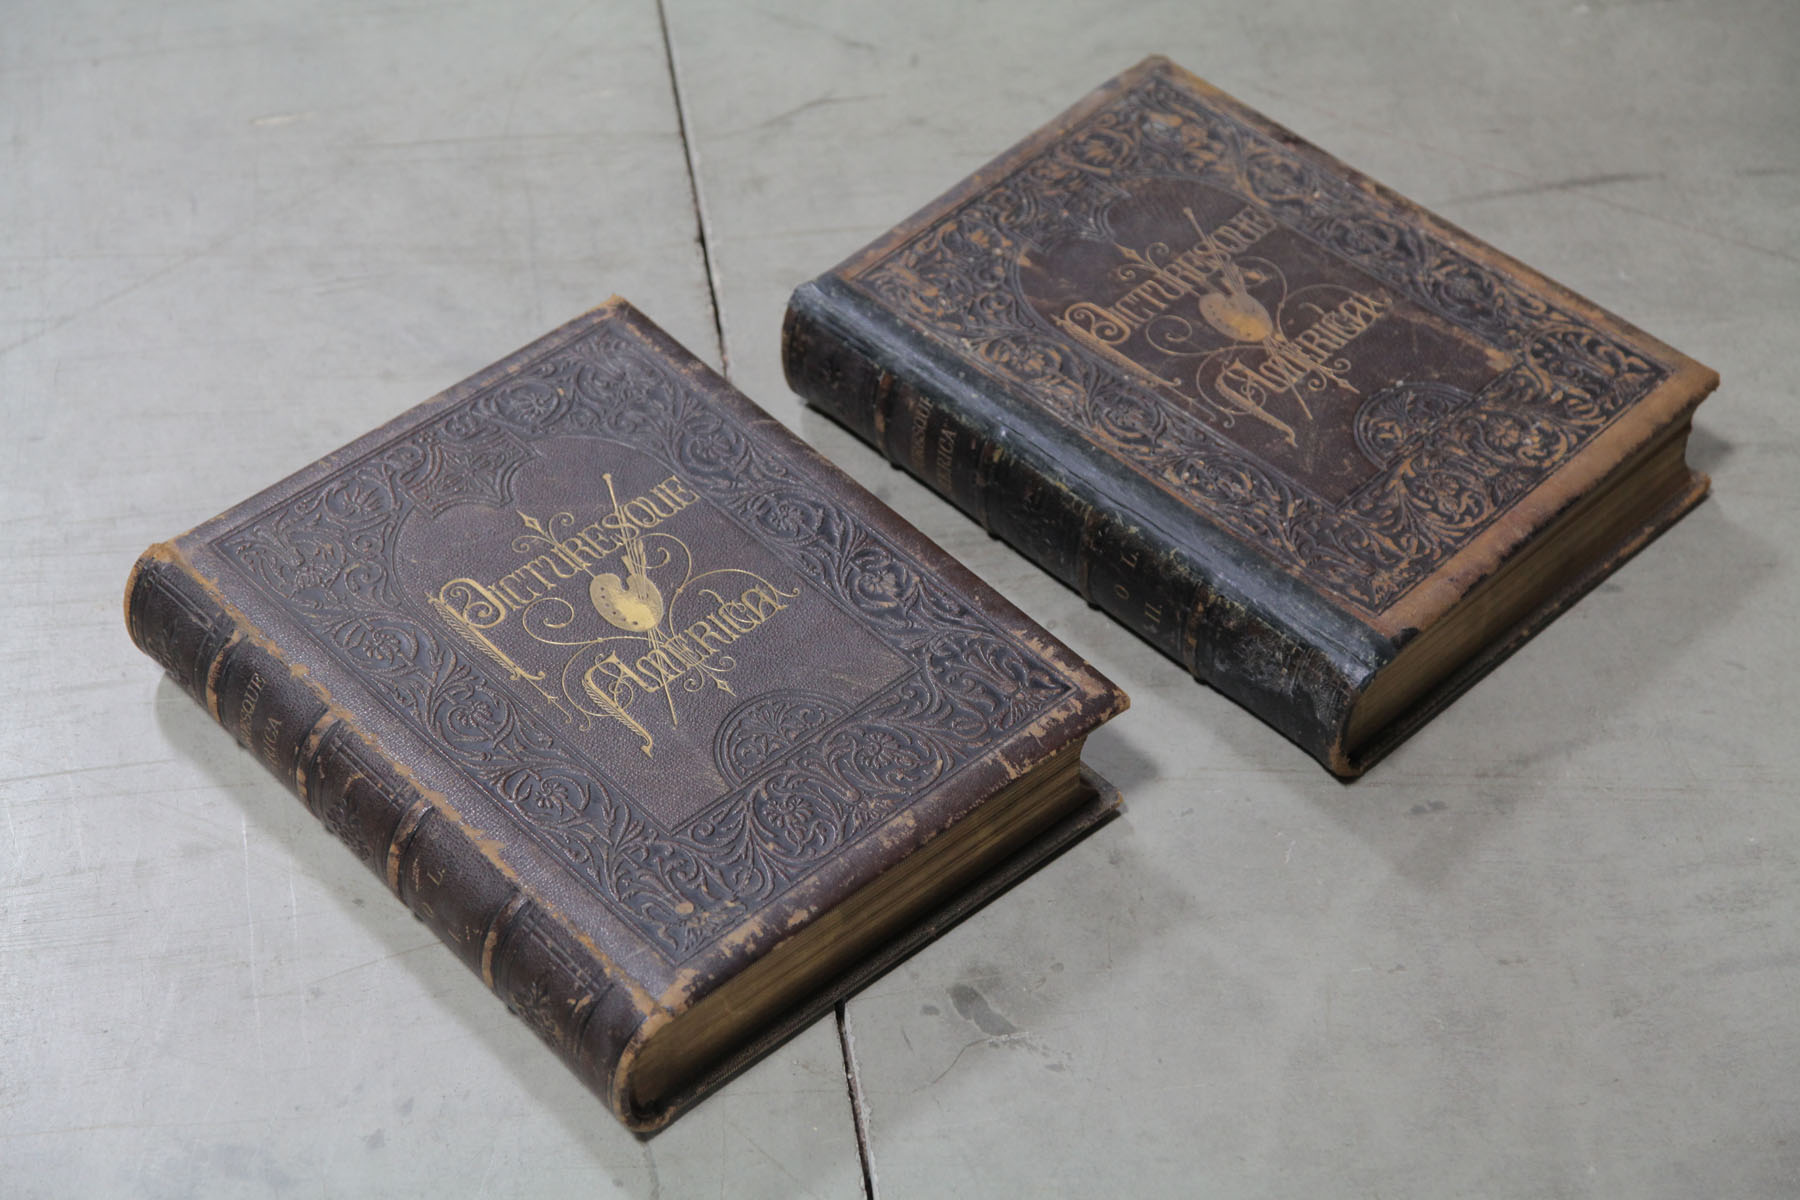 VOLUMES I AND II OF PICTURESQUE AMERICA.